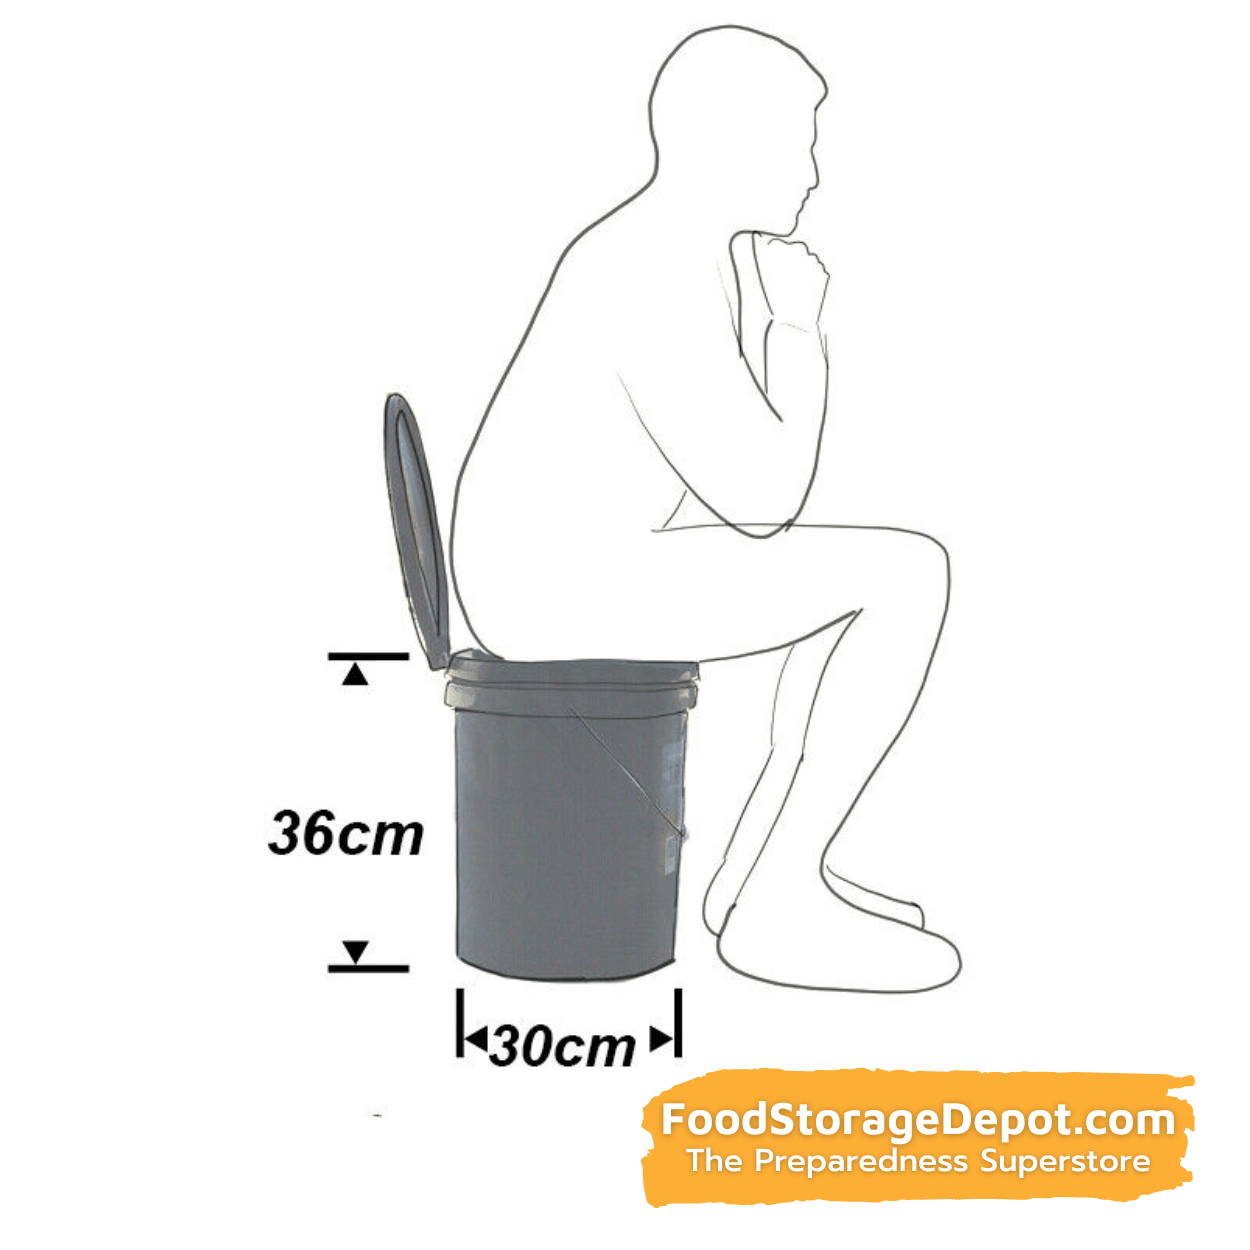 Portable Emergency Toilet Seat with 5 Gallon Bucket